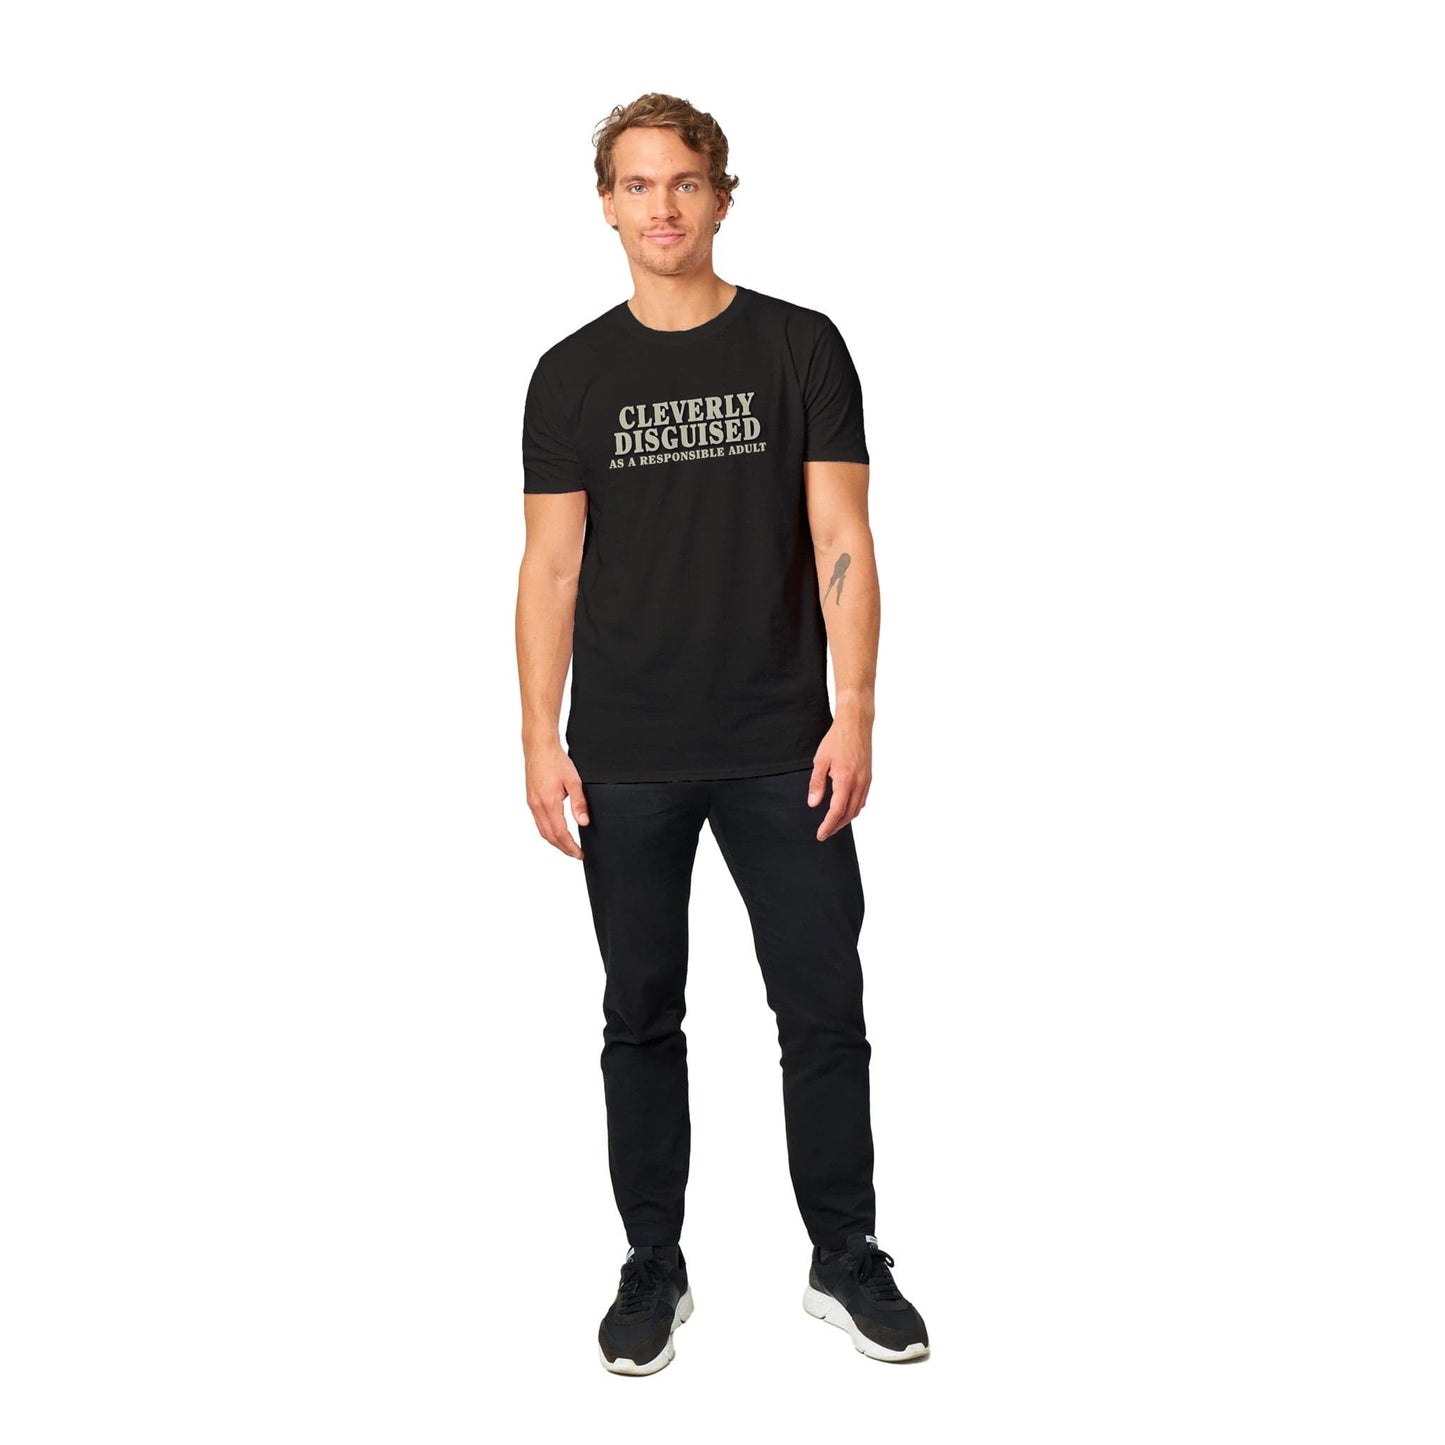 Cleverly Disguised T-Shirt Graphic Tee Australia Online